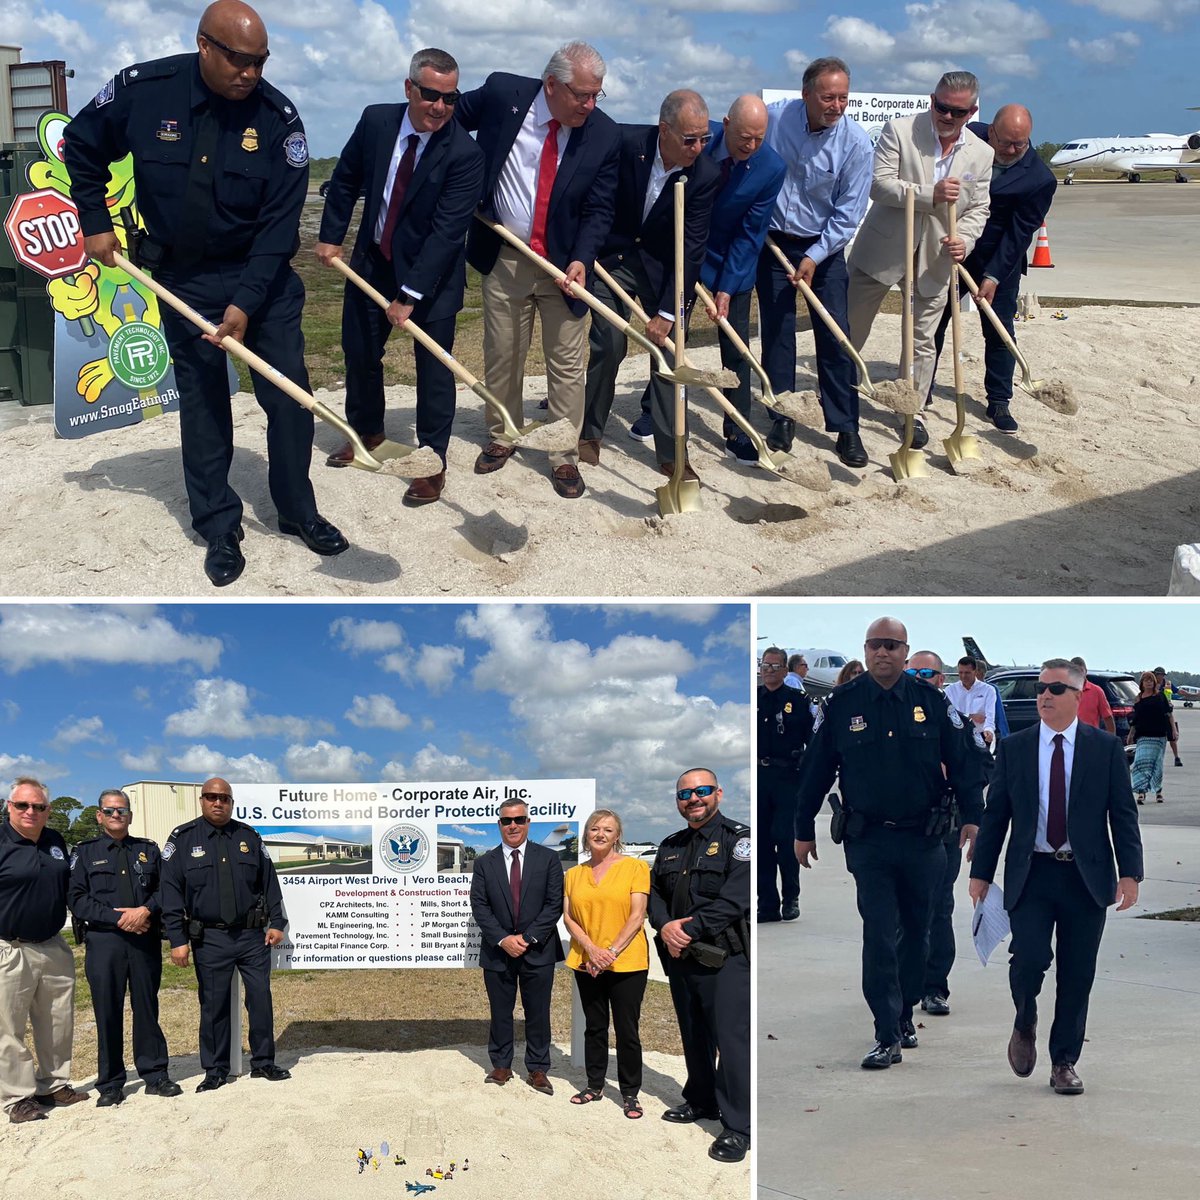 CBP Florida officially welcomed Vero Beach Regional Airport to the U.S. Customs and Border Protection User Fee Facility family on Wednesday. This groundbreaking event is another step in facilitating legitimate travel across our borders.  @flyverobeach